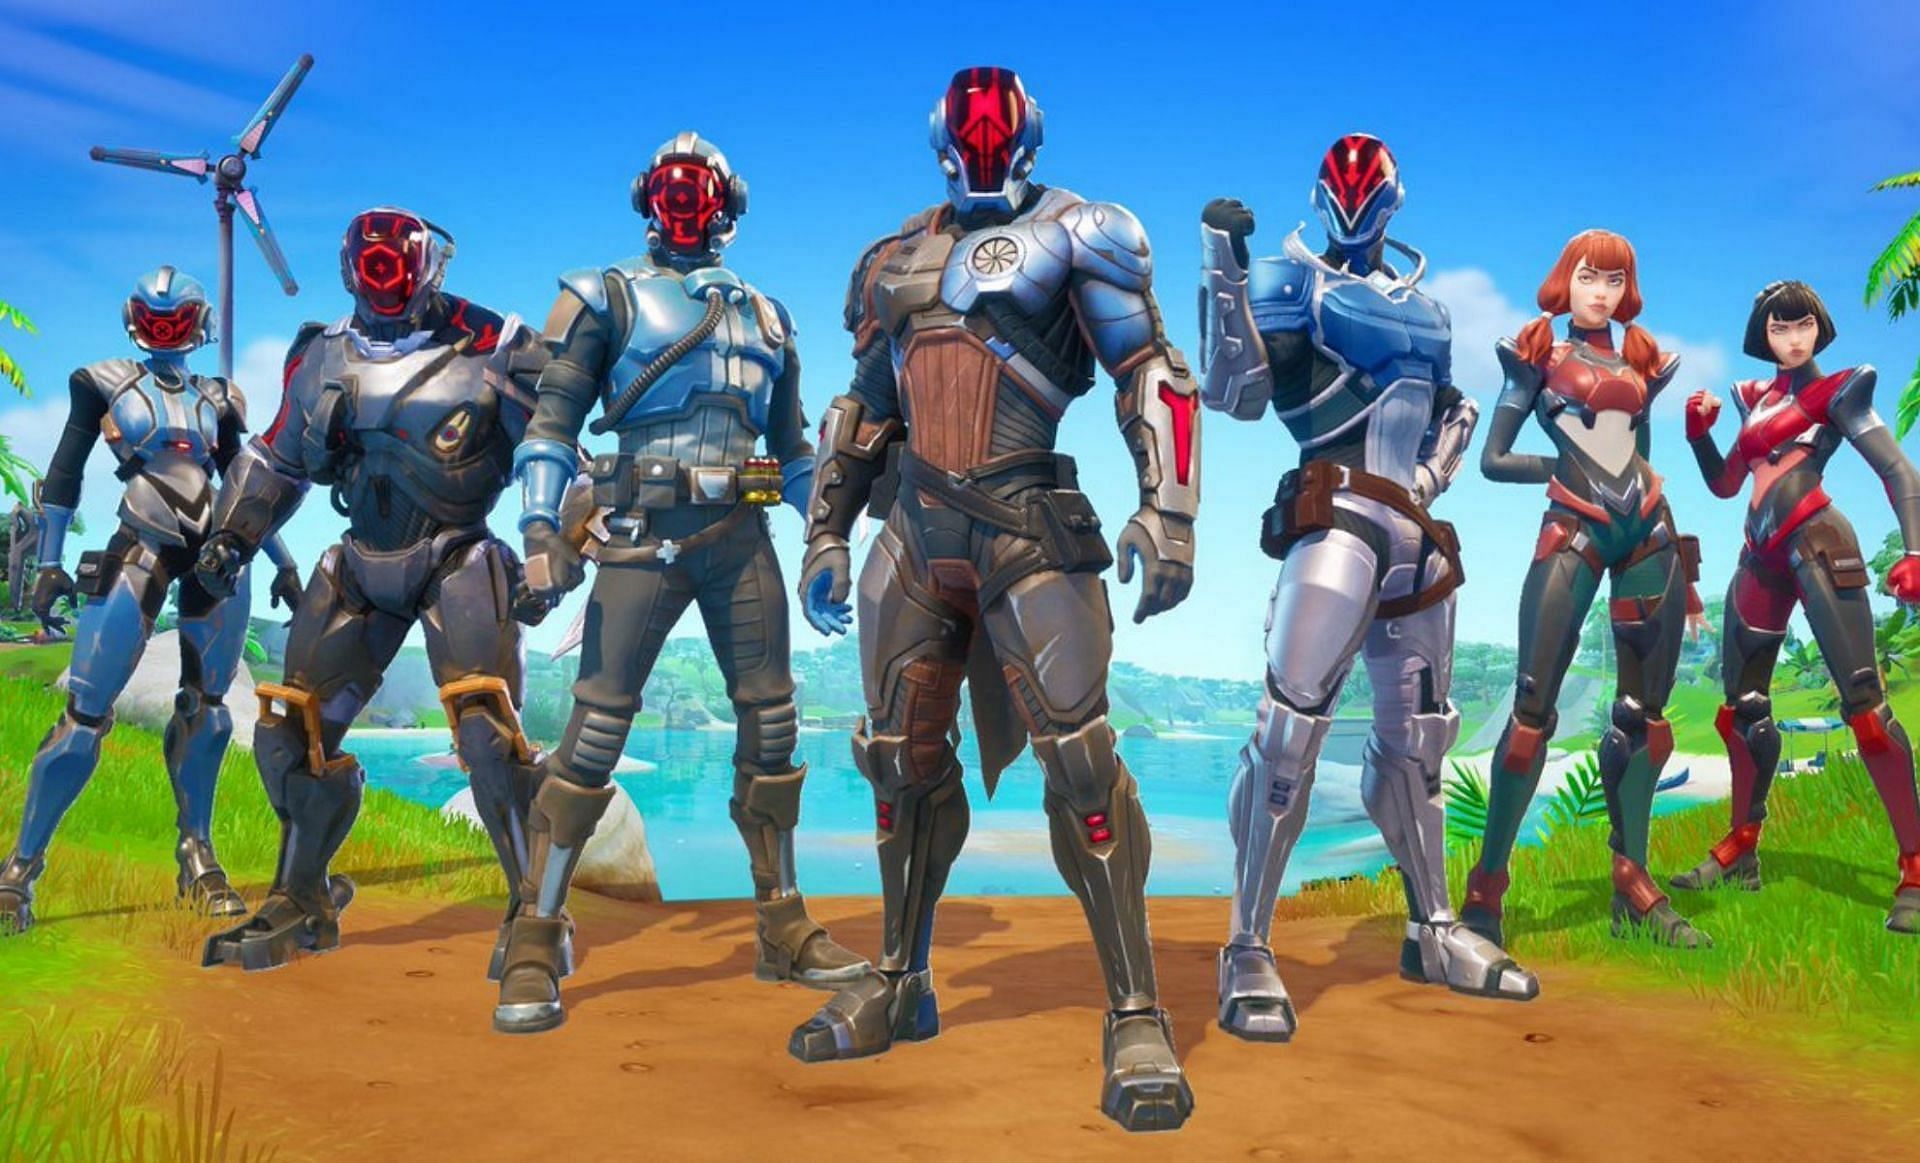 Some Fortnite The Seven skins were more hyped than others (Image via T5G/Twitter)